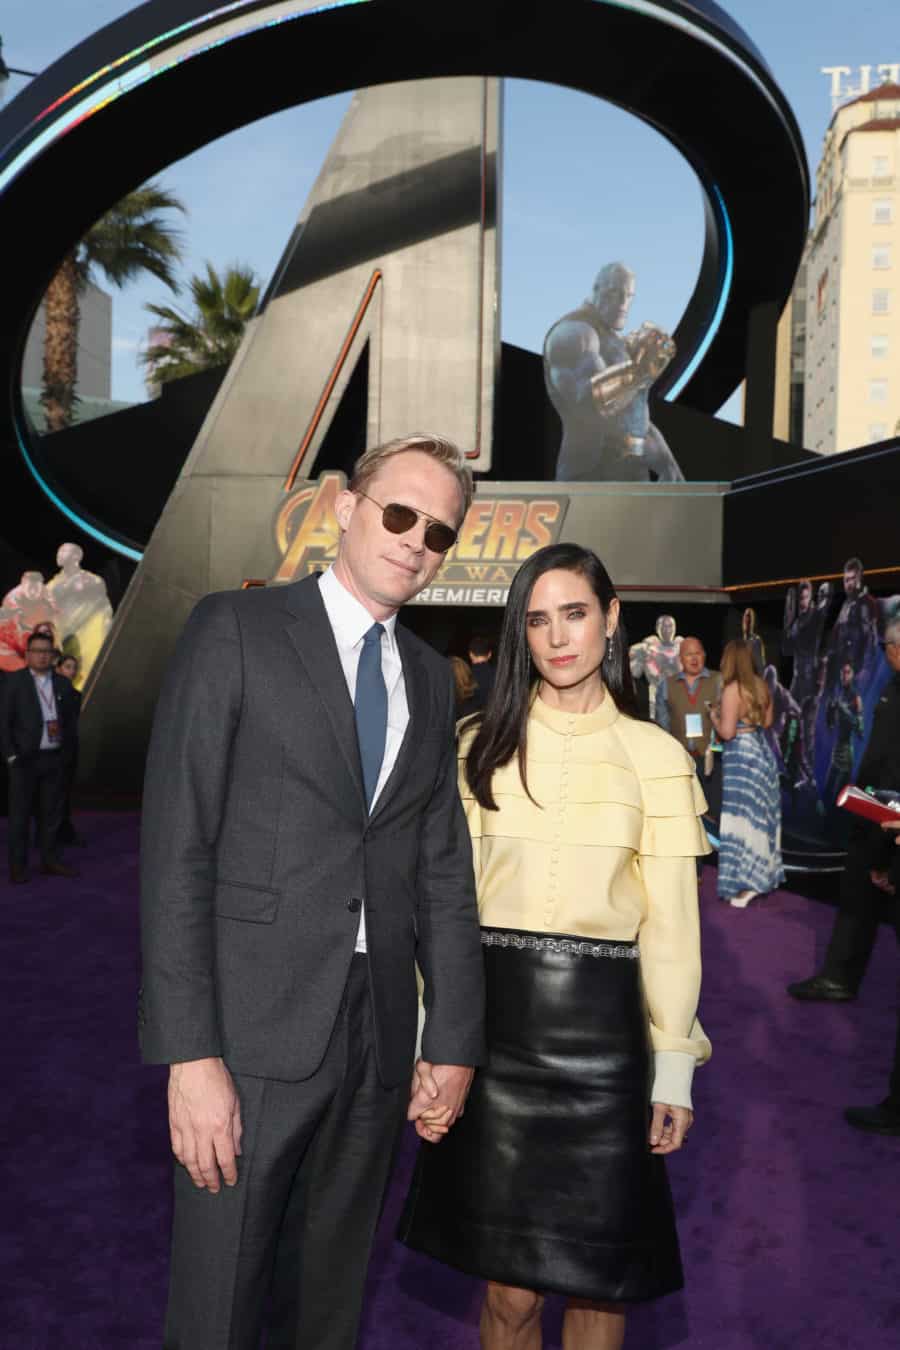 HOLLYWOOD, CA - APRIL 23:  Actors Paul Bettany (L) and Jennifer Connelly attend the Los Angeles Global Premiere for Marvel Studios Avengers: Infinity War on April 23, 2018 in Hollywood, California.  (Photo by Rich Polk/Getty Images for Disney) *** Local Caption *** Jennifer Connelly; Paul Bettany